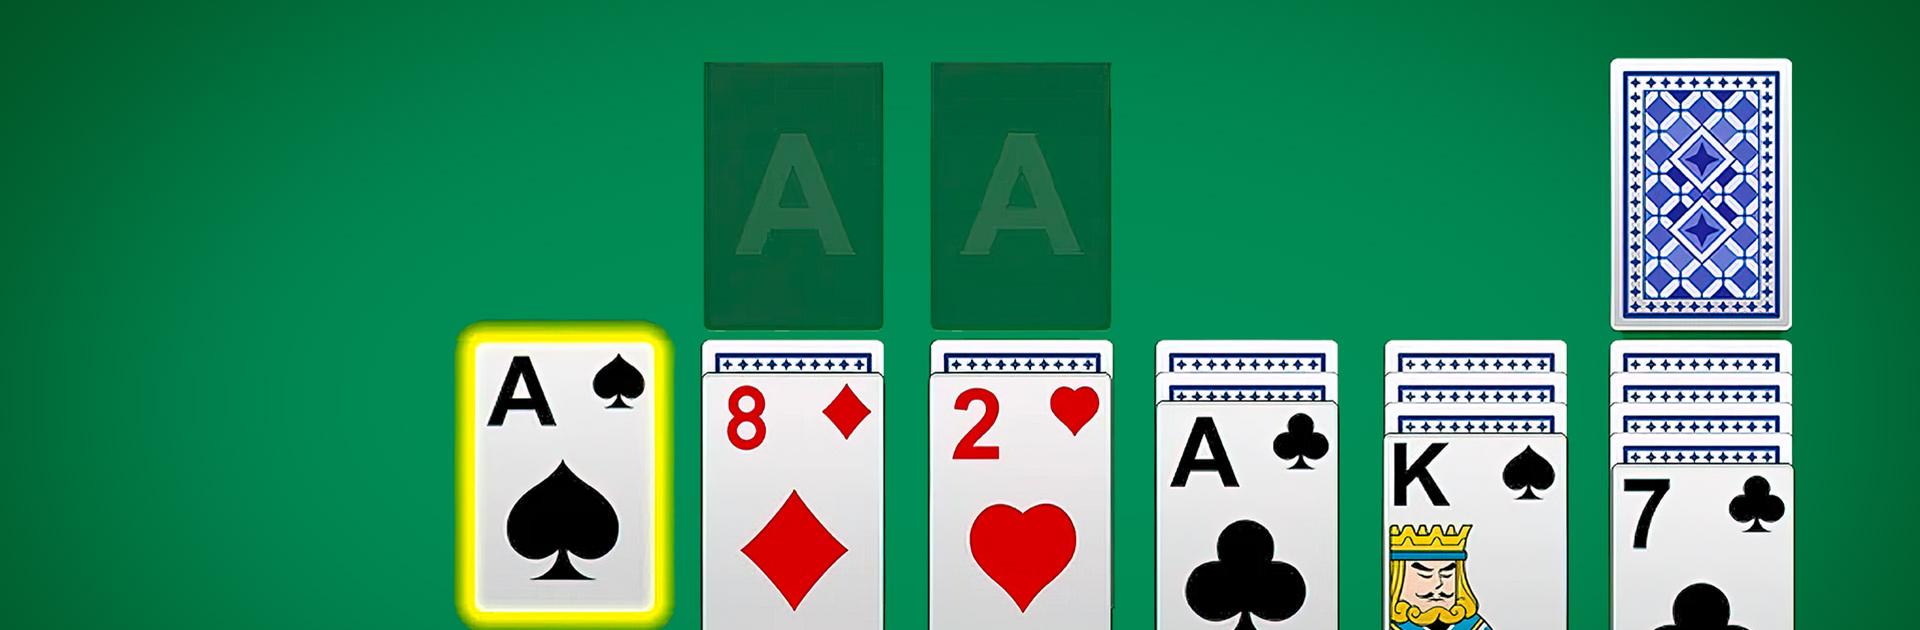 Download & Play Solitaire - Classic Card Games on PC & Mac (Emulator).